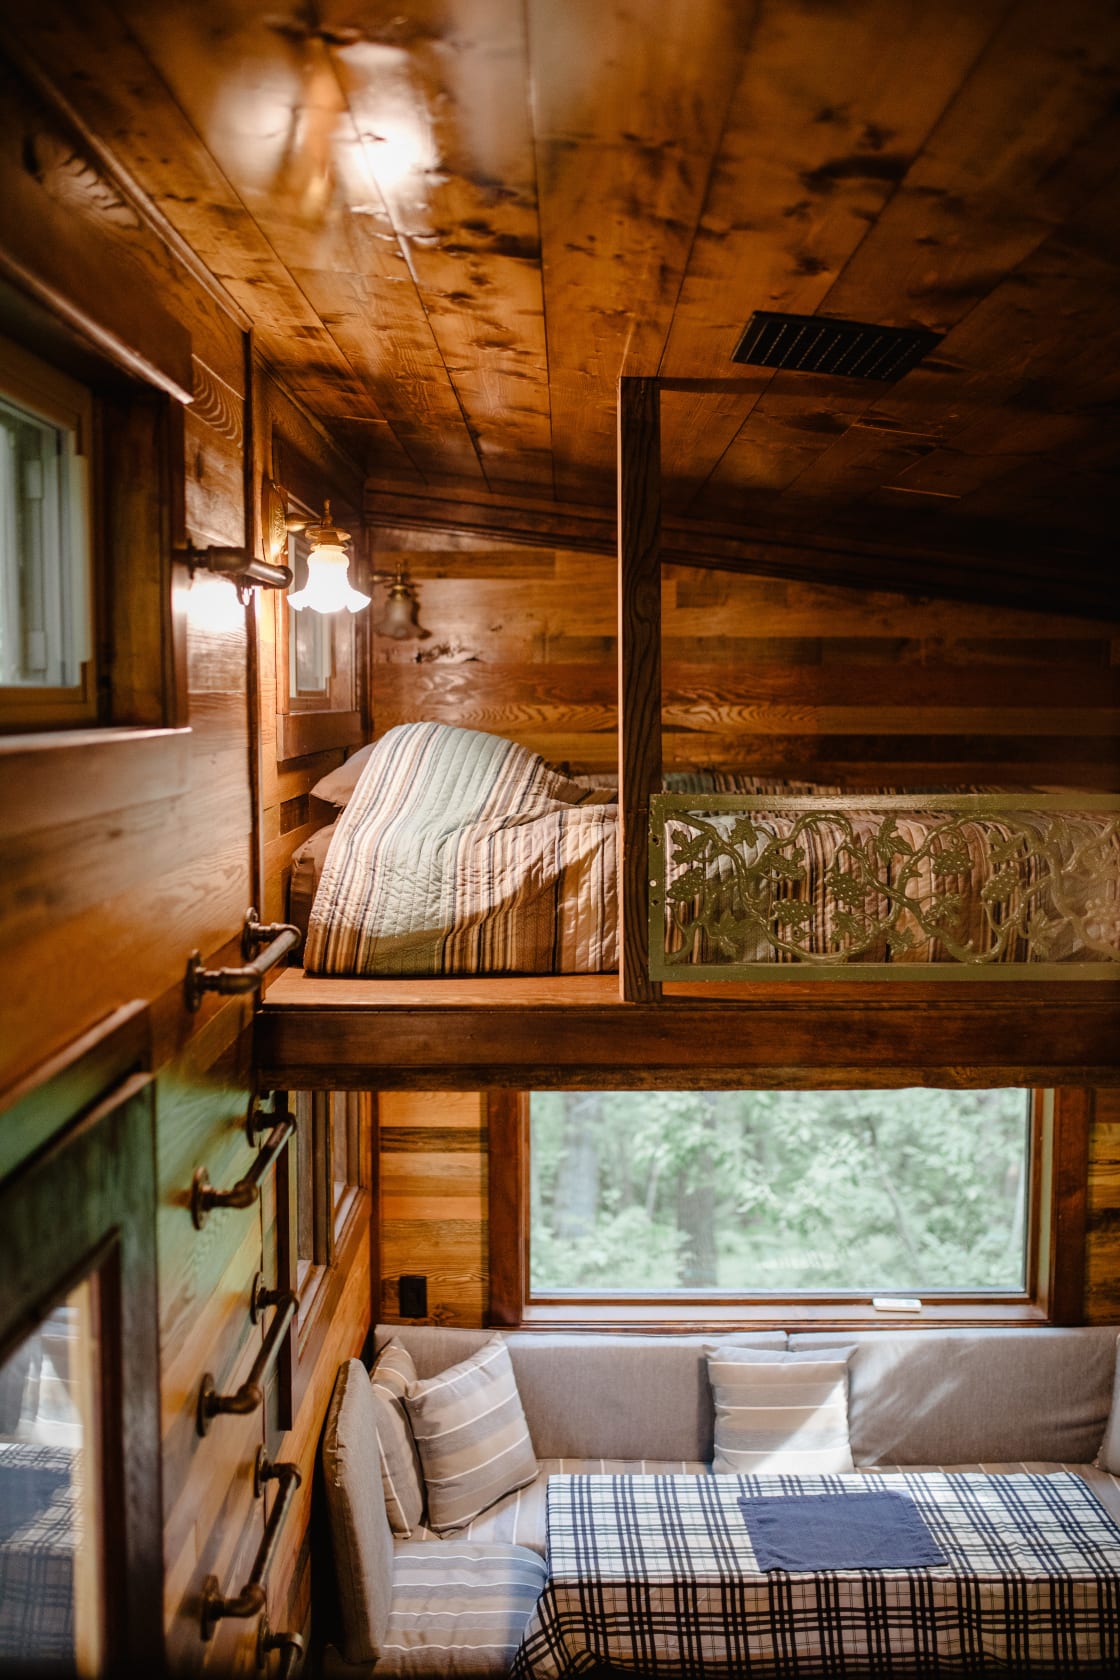 upper loft (1 of 2 lofted beds in the main cabin!)